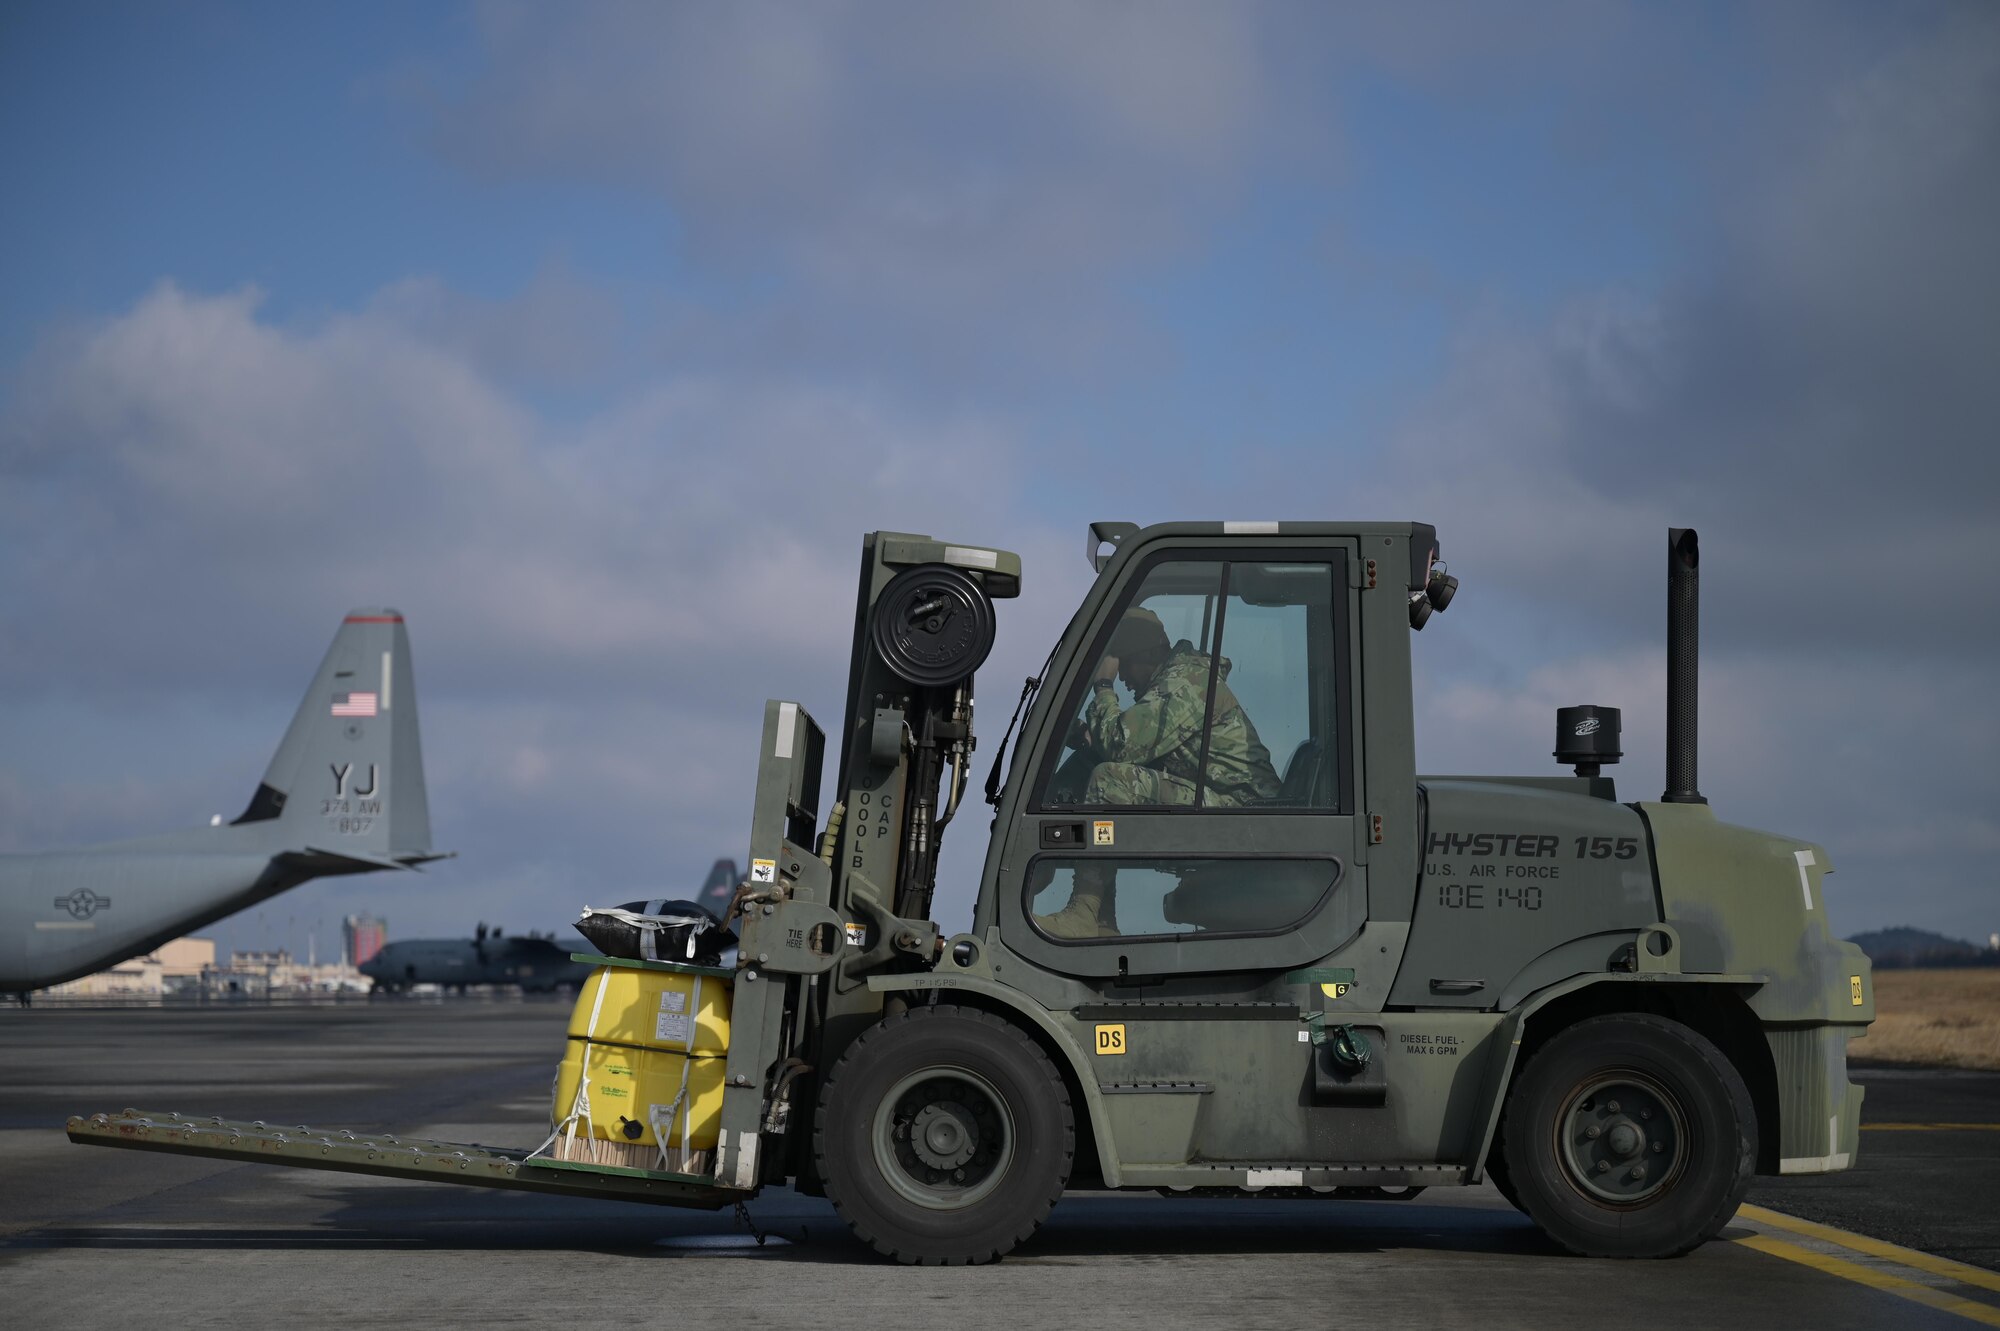 An Airman from the 374th Logistics Readiness Squadron waits to load cargo on a C-130J Super Hercules on the flightline at Yokota Air Base, Japan, during exercise Tomodachi Rescue 22 Feb. 11, 2022.